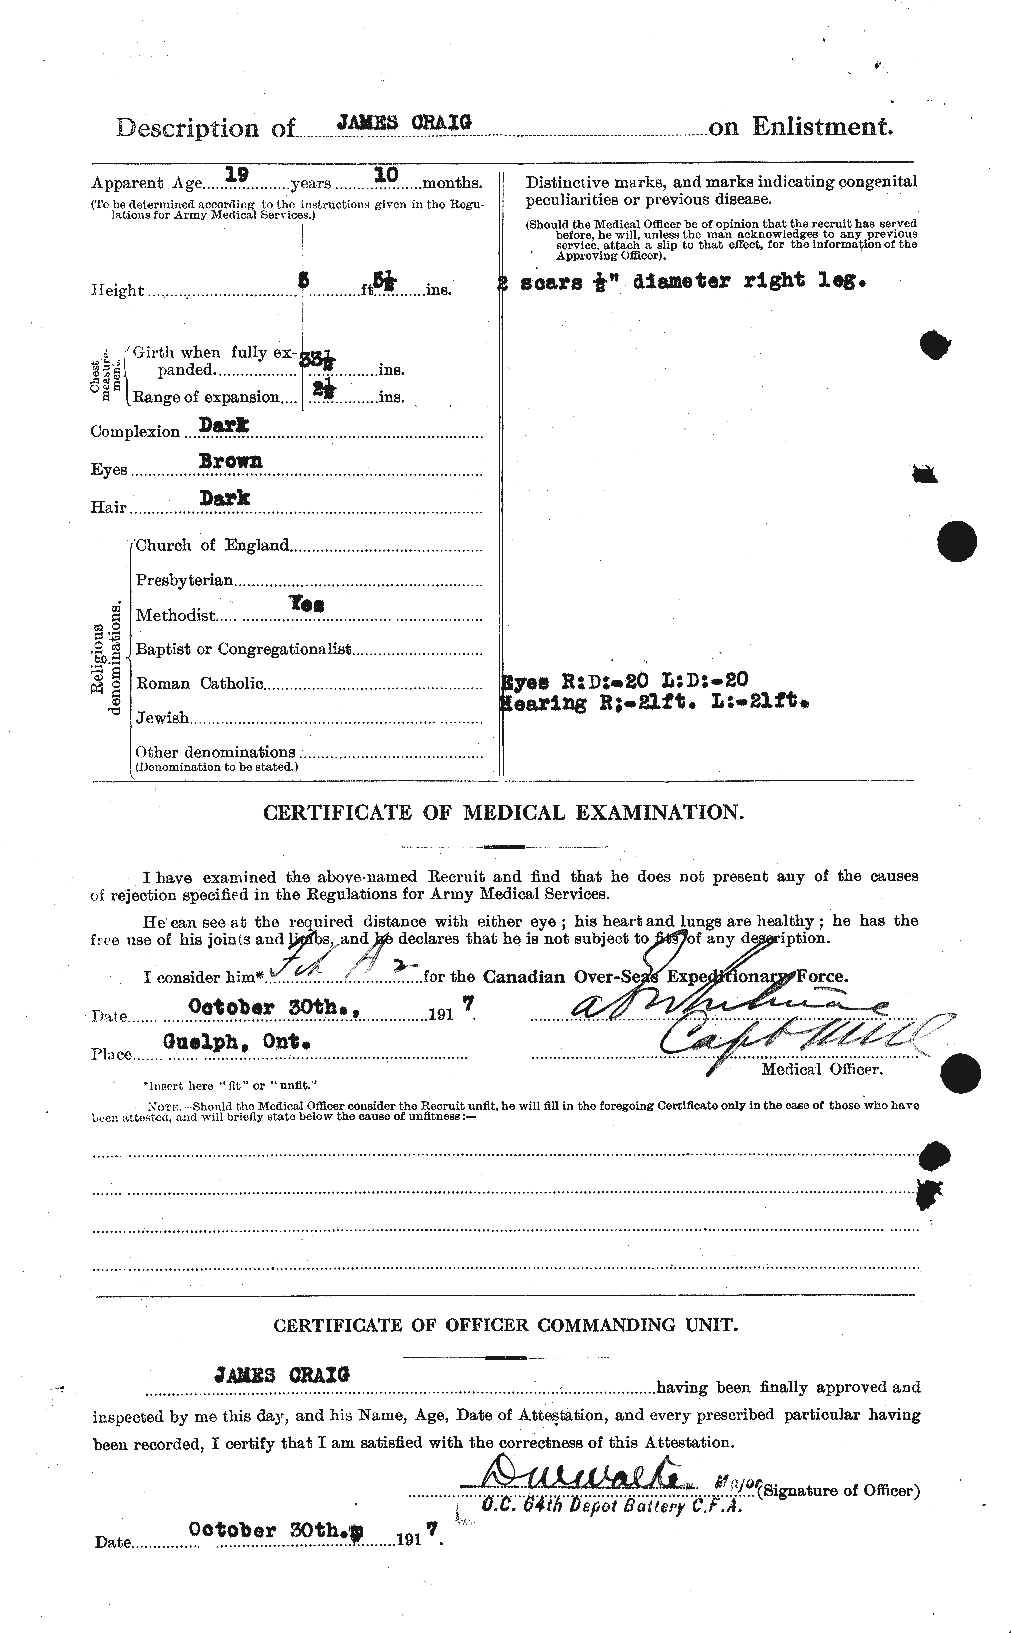 Personnel Records of the First World War - CEF 061672b